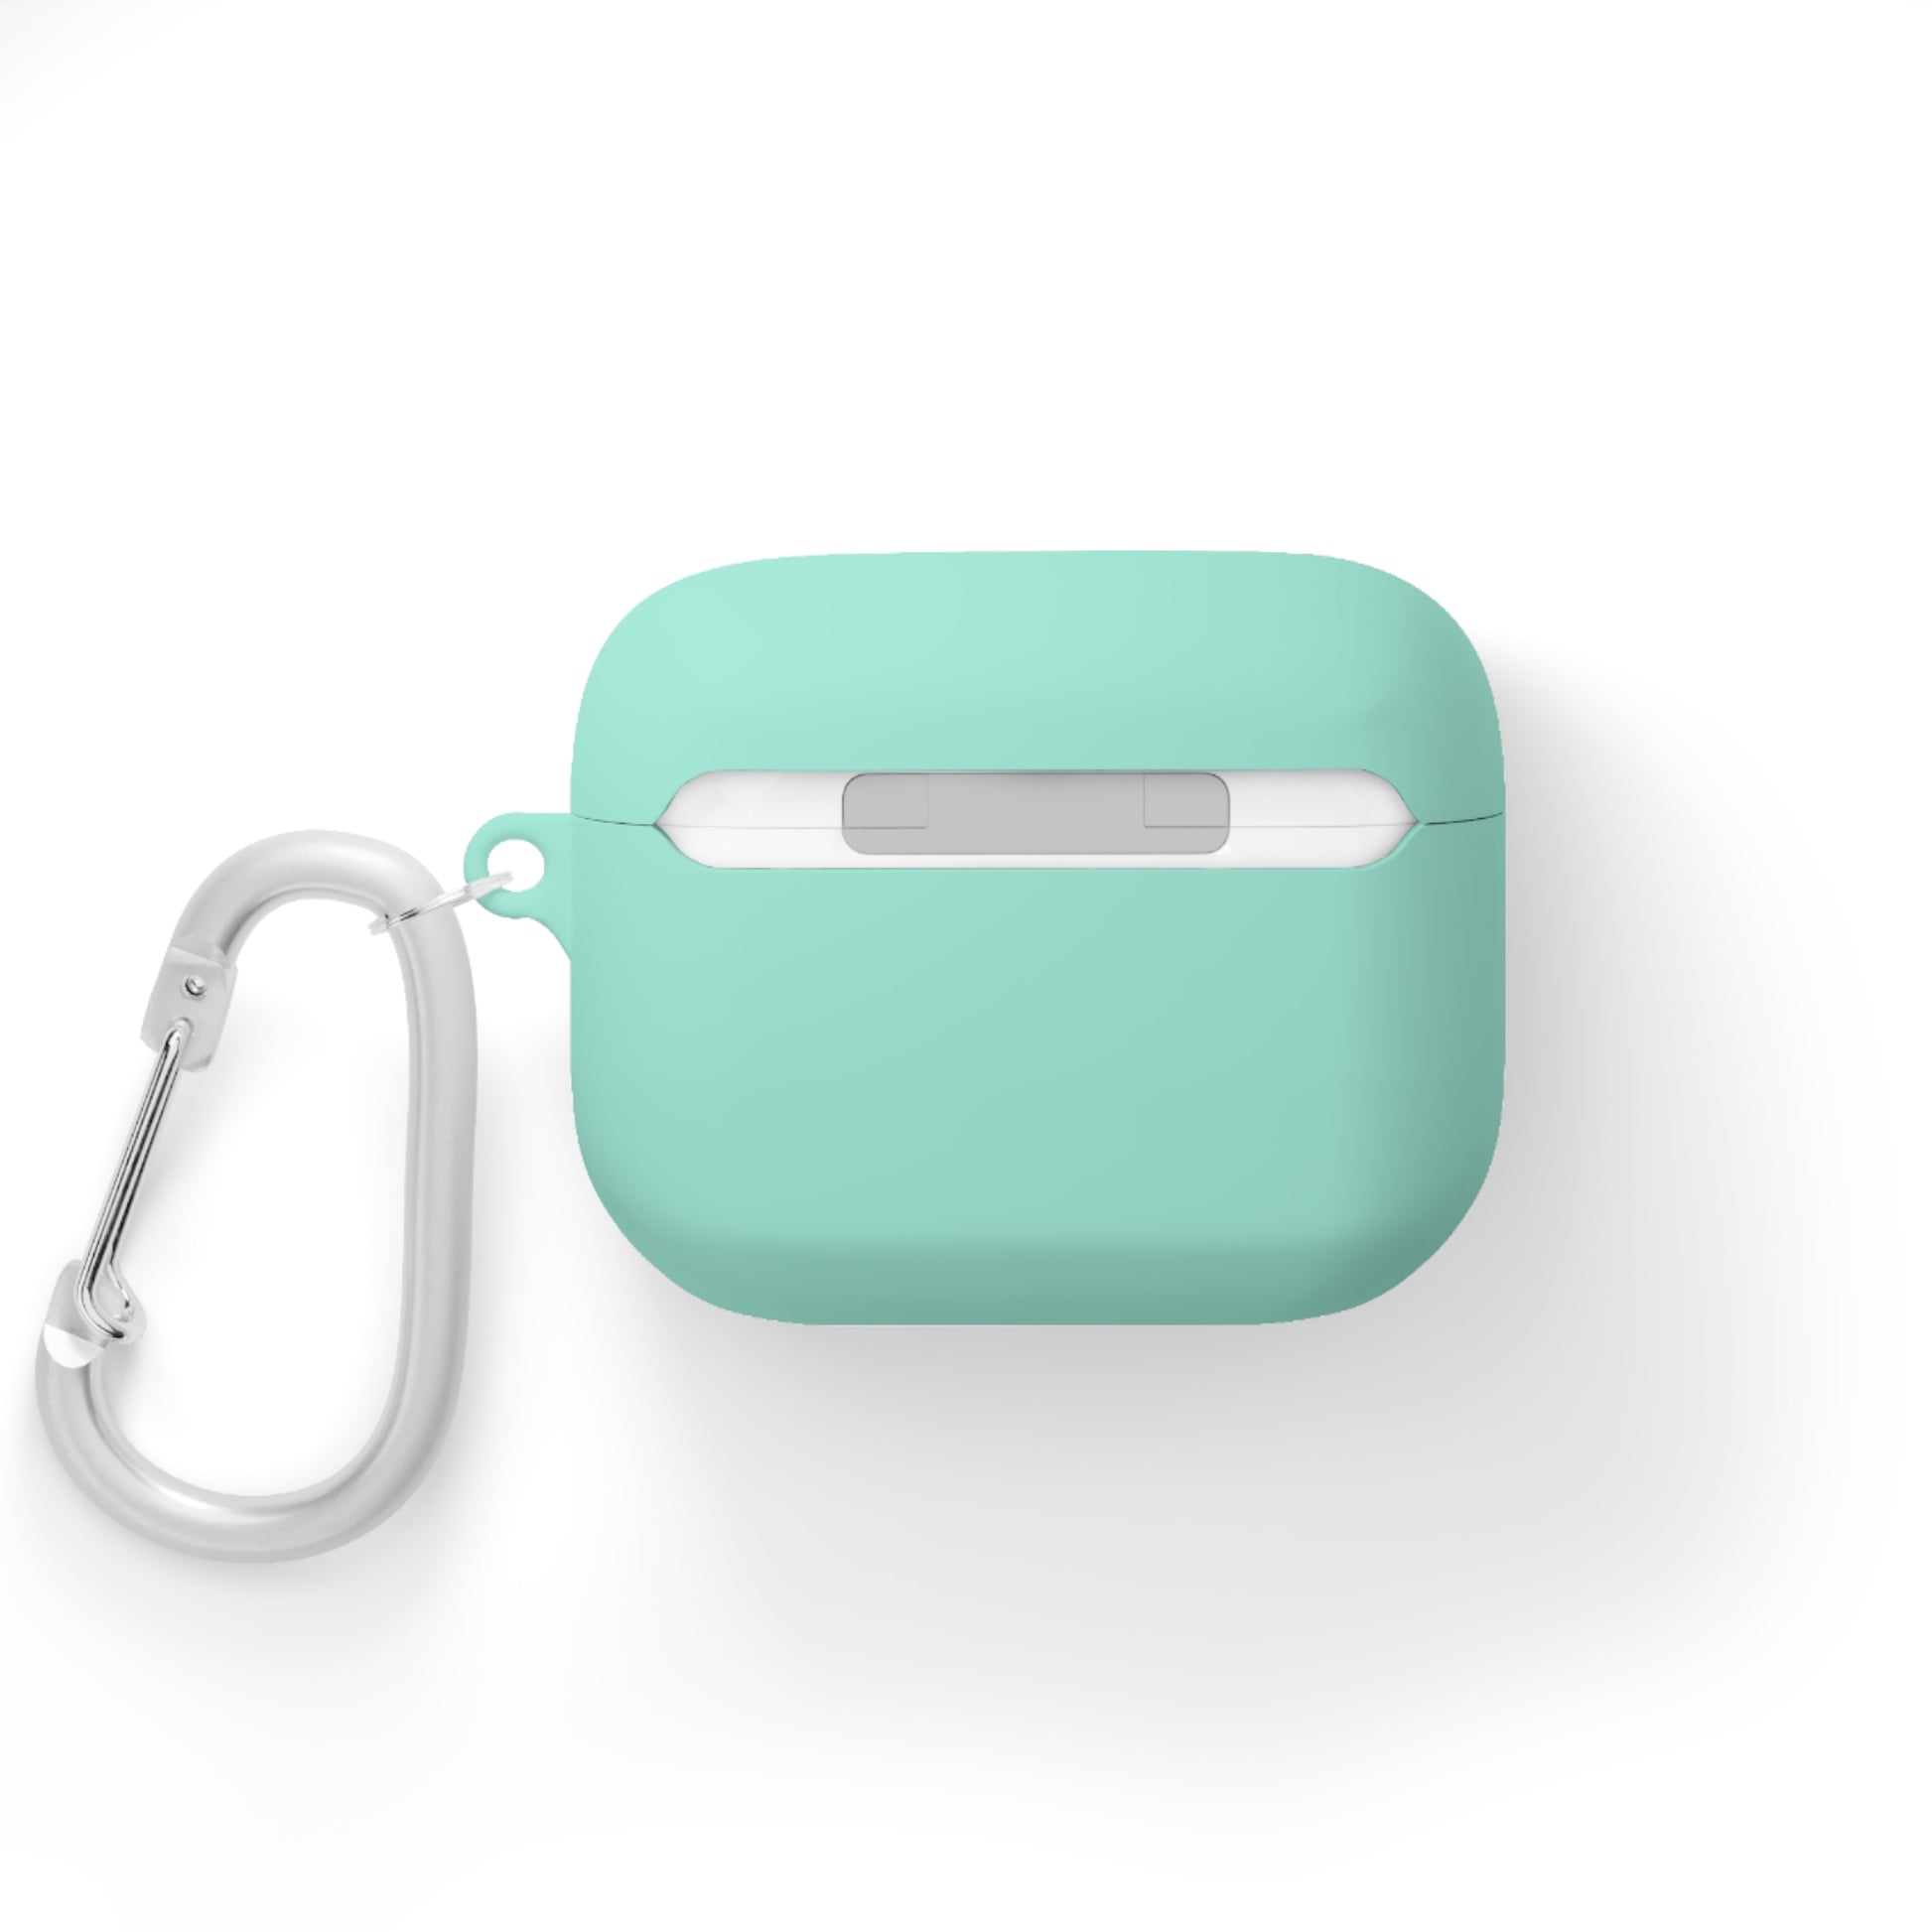 God Loved Me First AirPods / Airpods Pro Case cover Printify